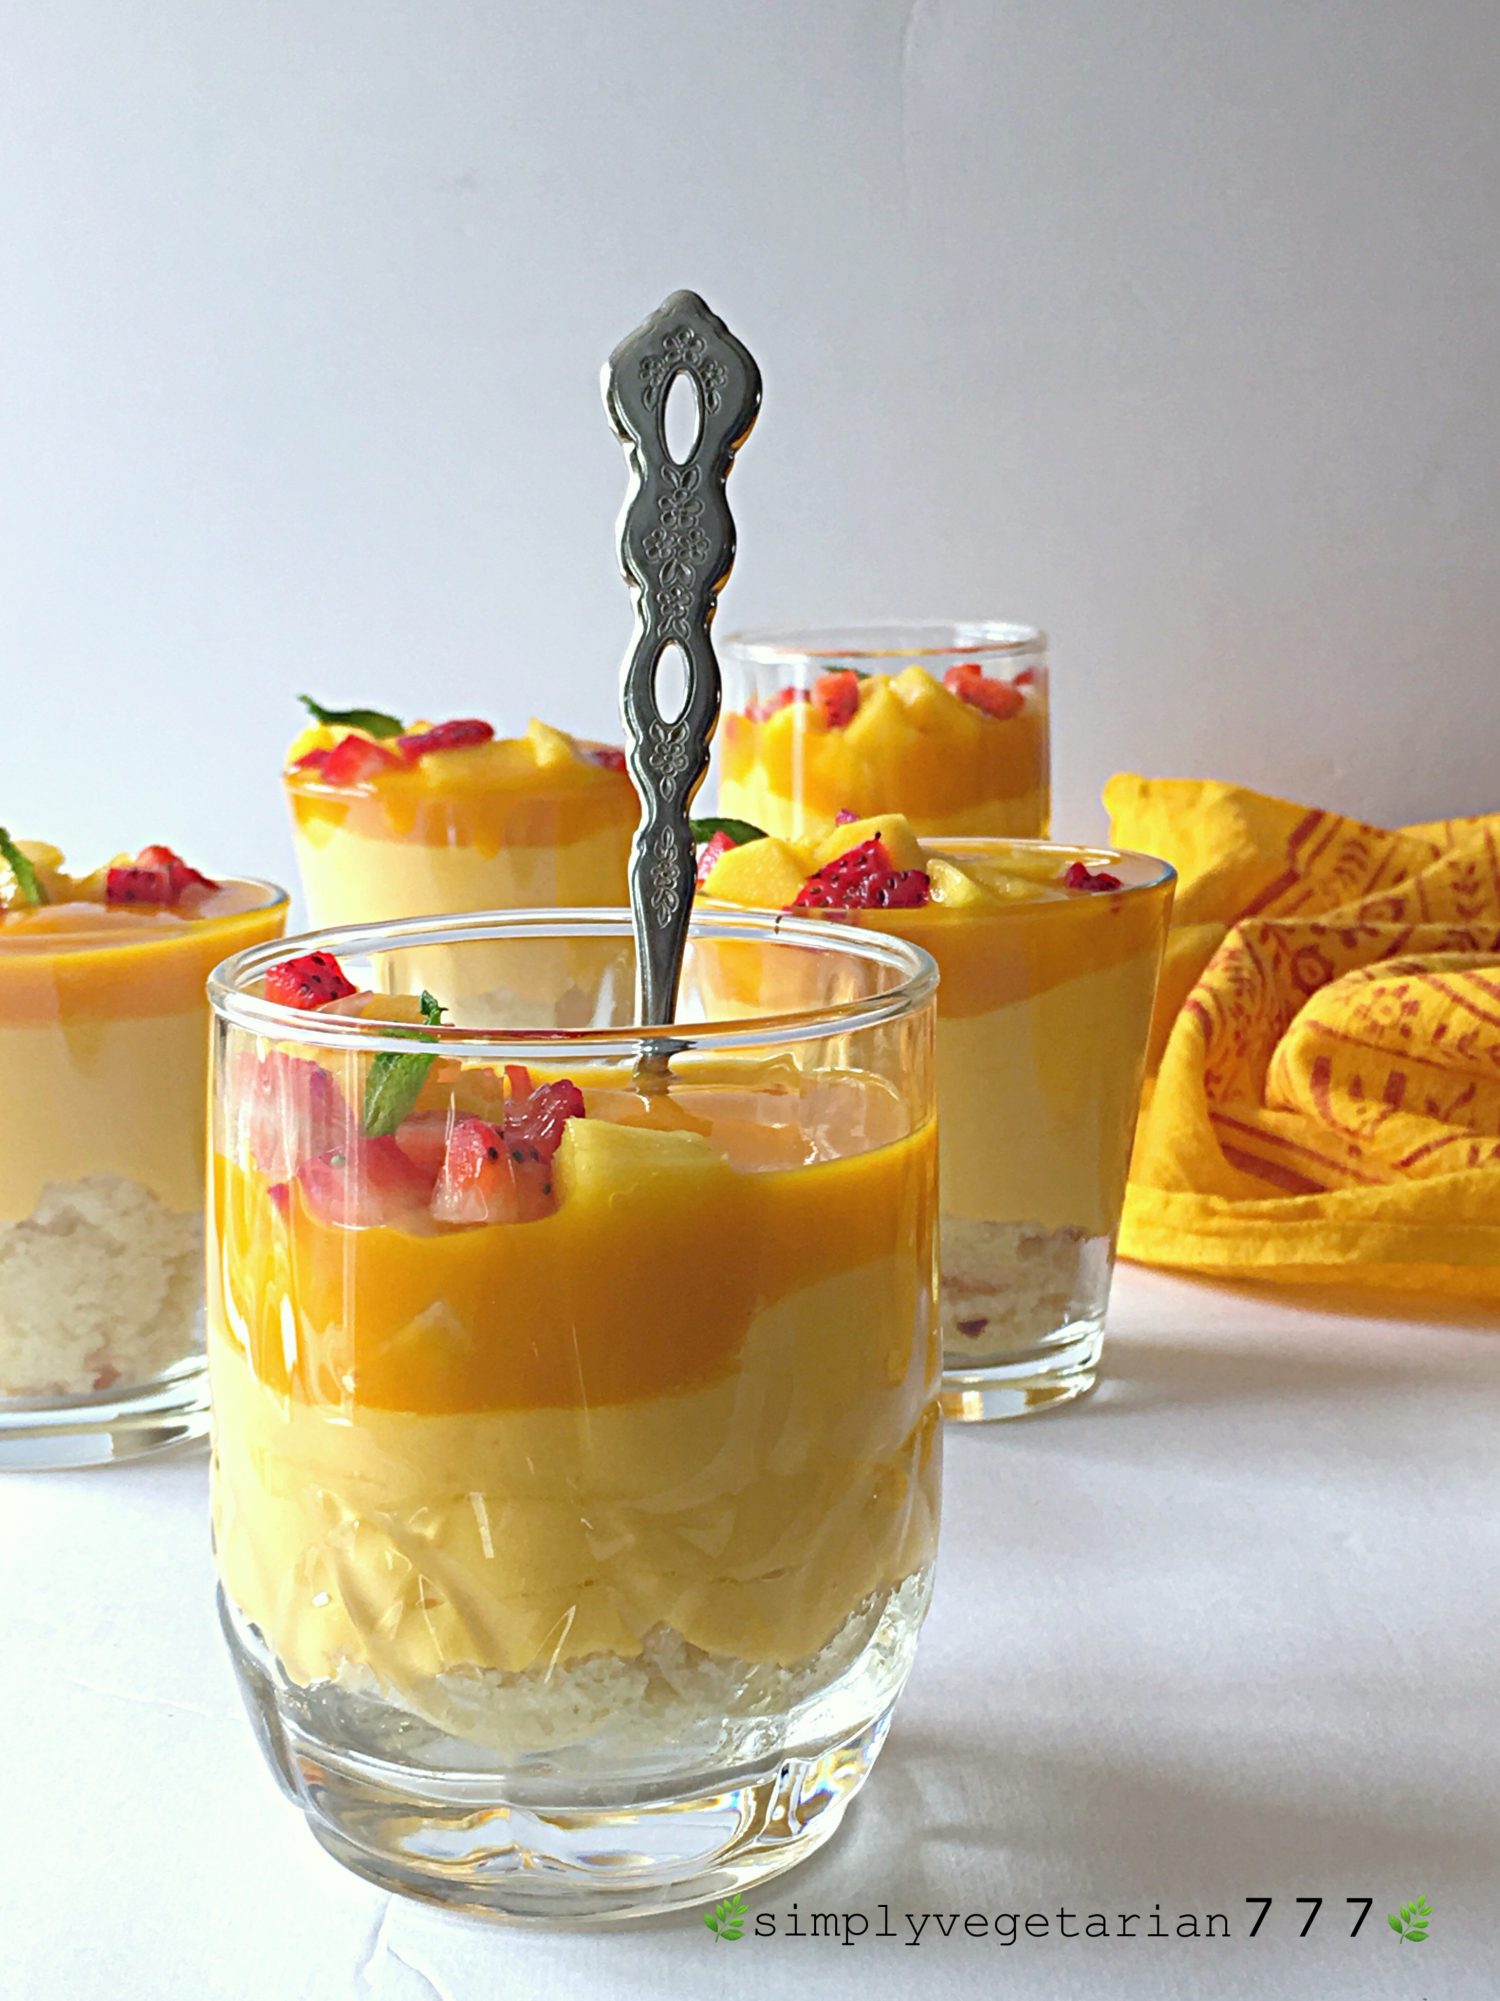 This Mango Cheesecake Trifle is very easy to make and super delicious. Most important part is that it is a No-Cook and No-Bake Recipe. It is a perfect dessert for your parties and get-togethers. #mangorecipes #cheesescake #mangocheesecake #nobakecheesecake #nocookcheesecake #triflerecipes #easydessert #mangodessert #cheesecake #summerdessert #nutfreedessert #easytrifle #partydessert #easycheesecake #nocookdessert 